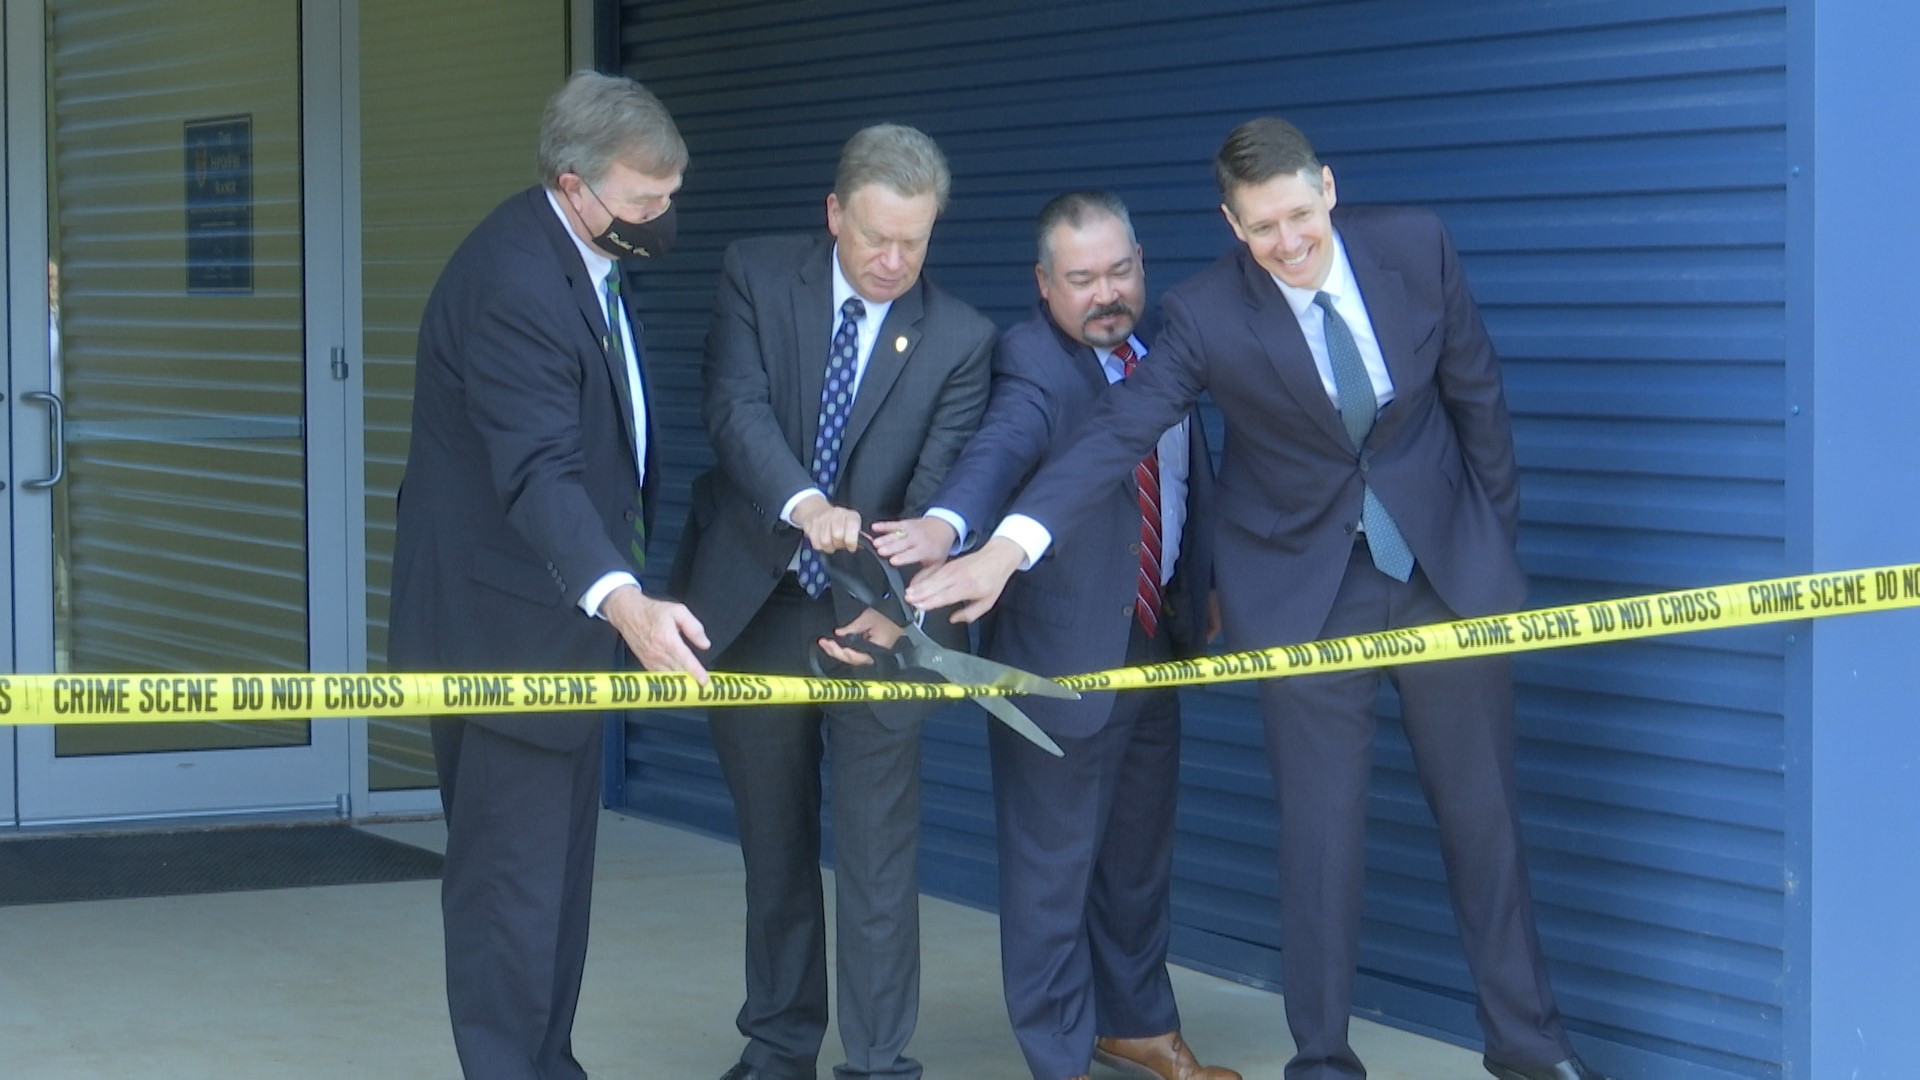 Both Huntsville Police and the FBI will go through training at the facility. Huntsville police will work to become certified in national standards.